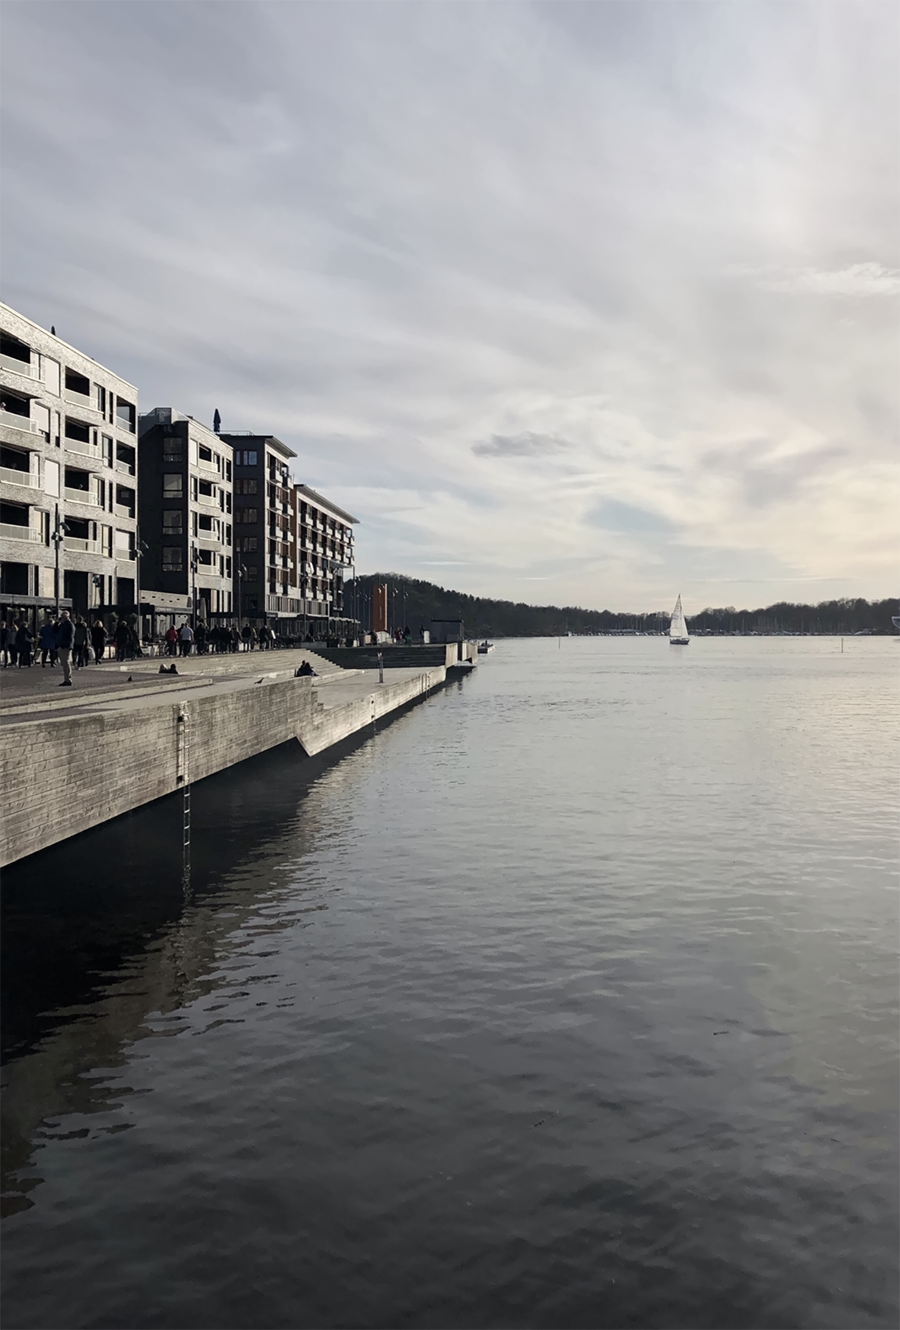 FIVE THINGS TO DO IN OSLO ON A SPRING DAY